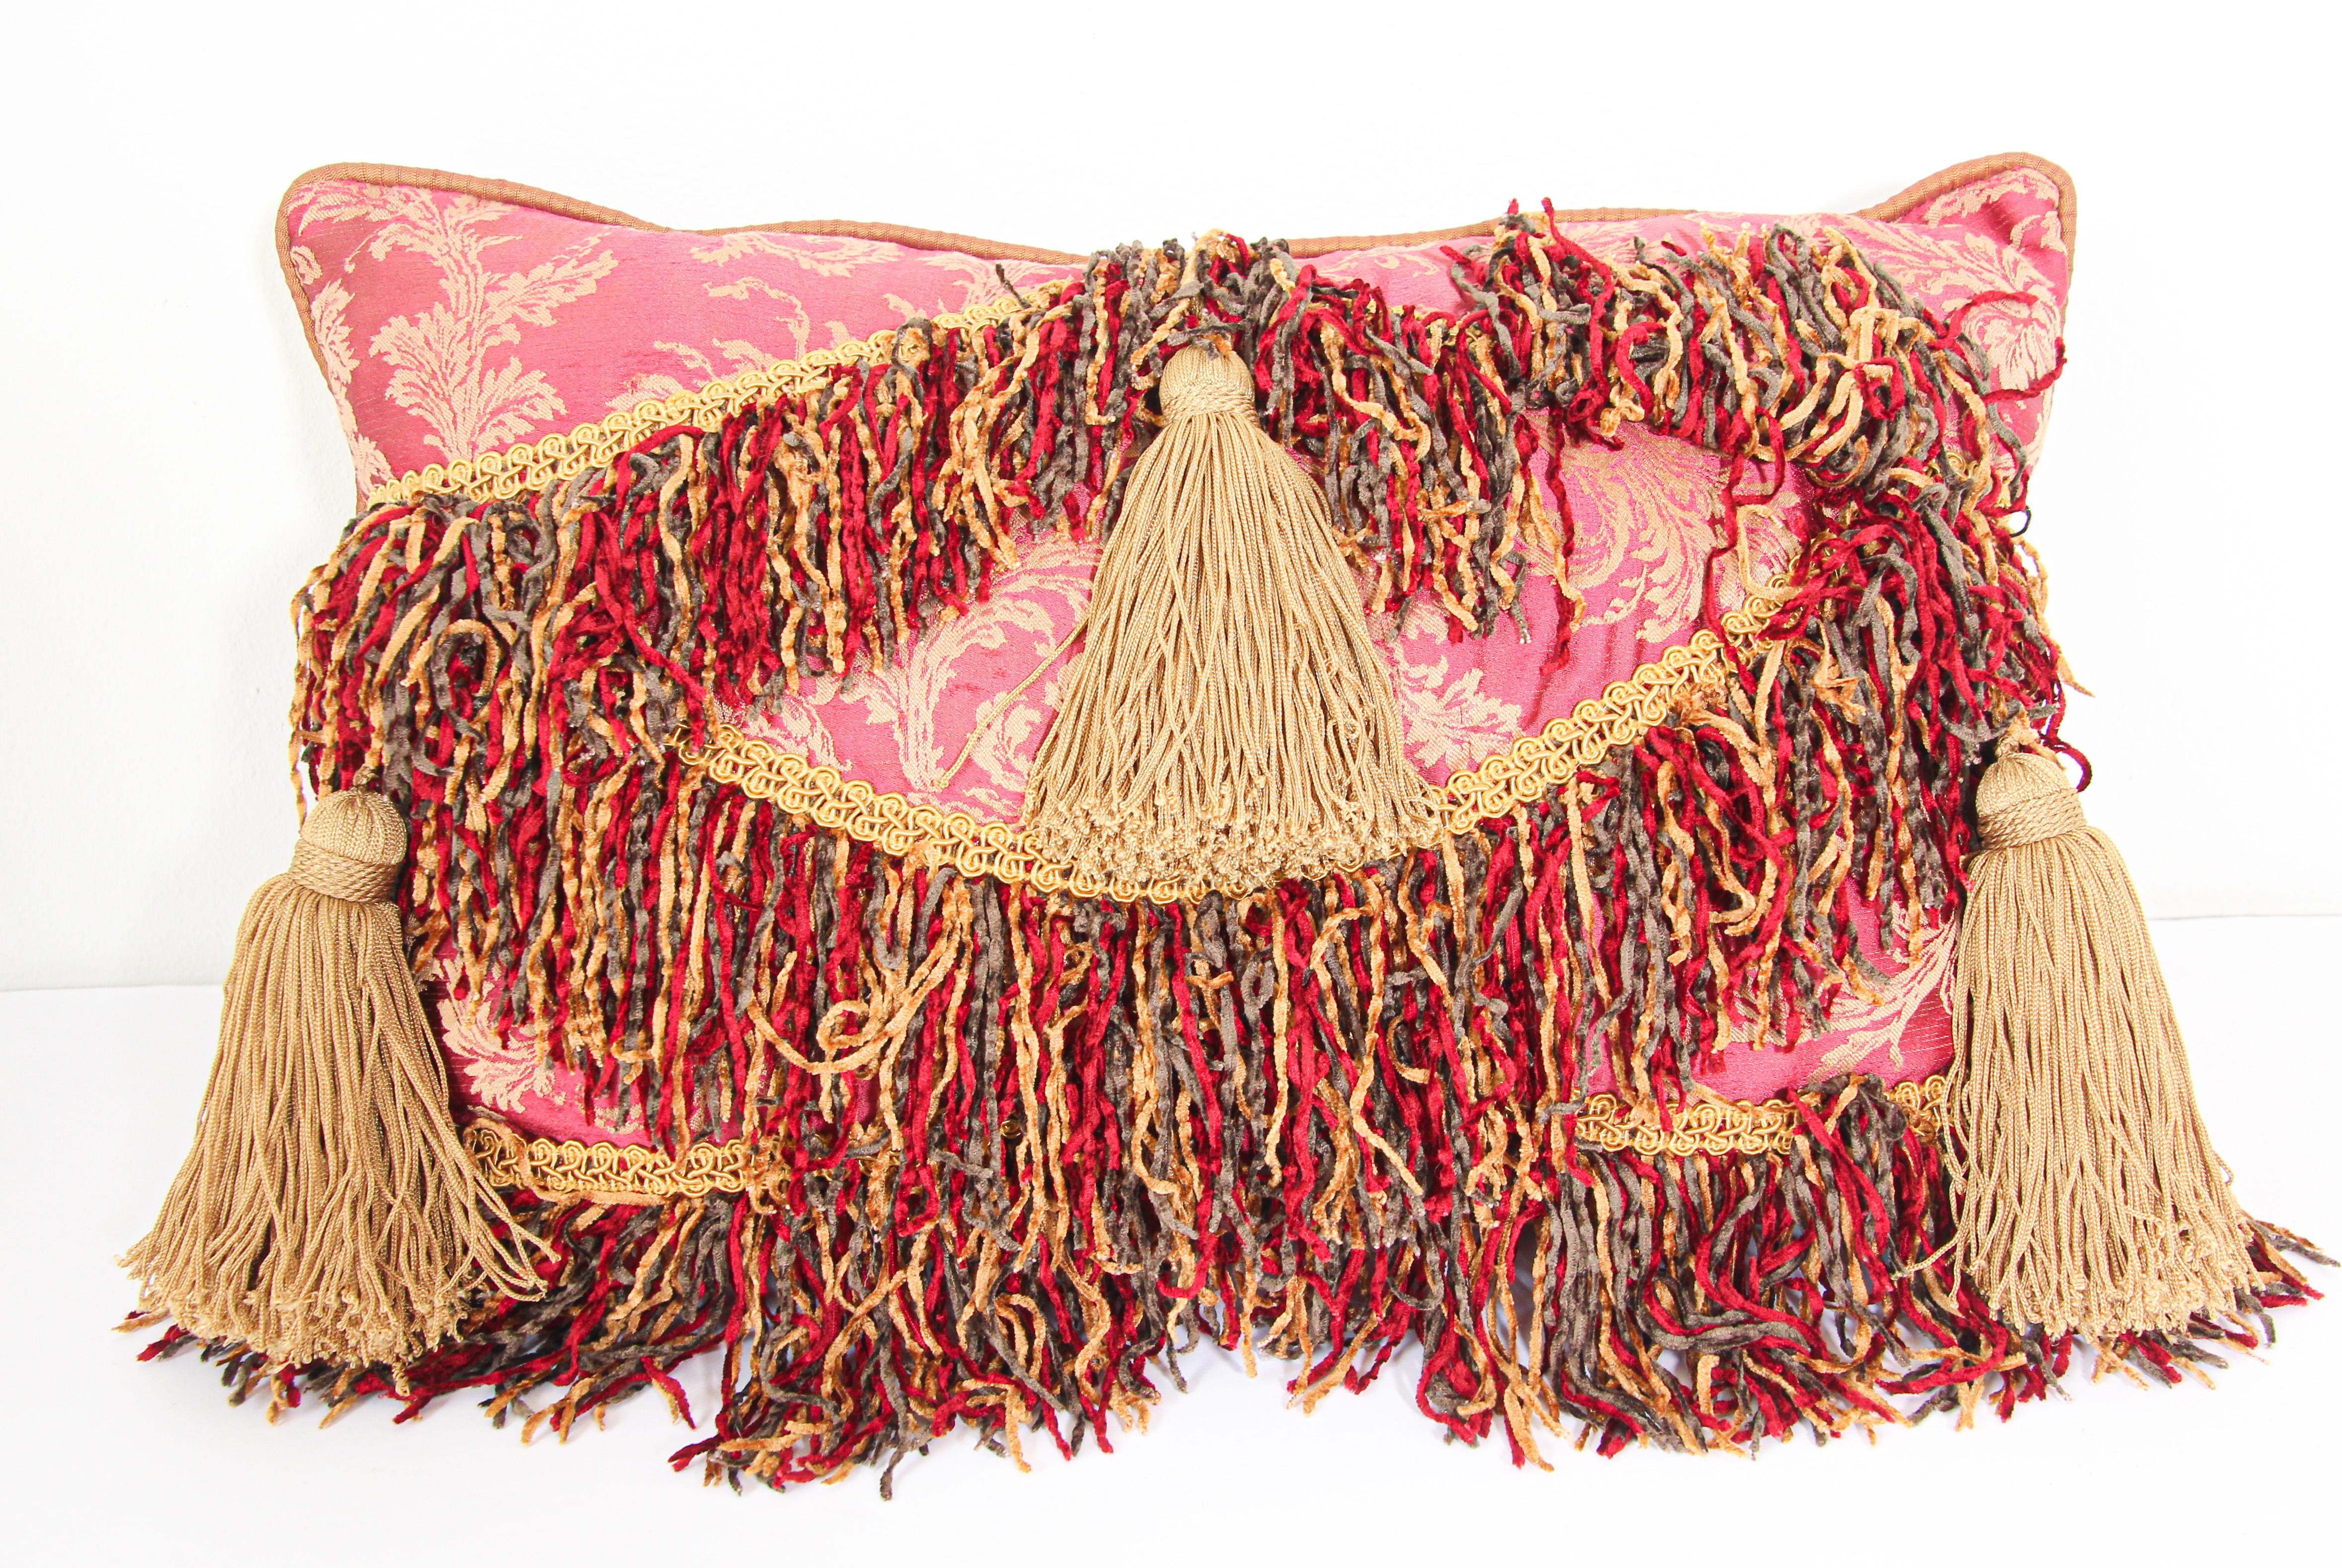 Middle Eastern Moorish style decorative throw pillow.
Luxury pillow in red, Pink and gold with an accent textile fragment in Venetian Fortuny style fabric in red and blue.
Decorative silk trim has been applied to finish the edges accented with